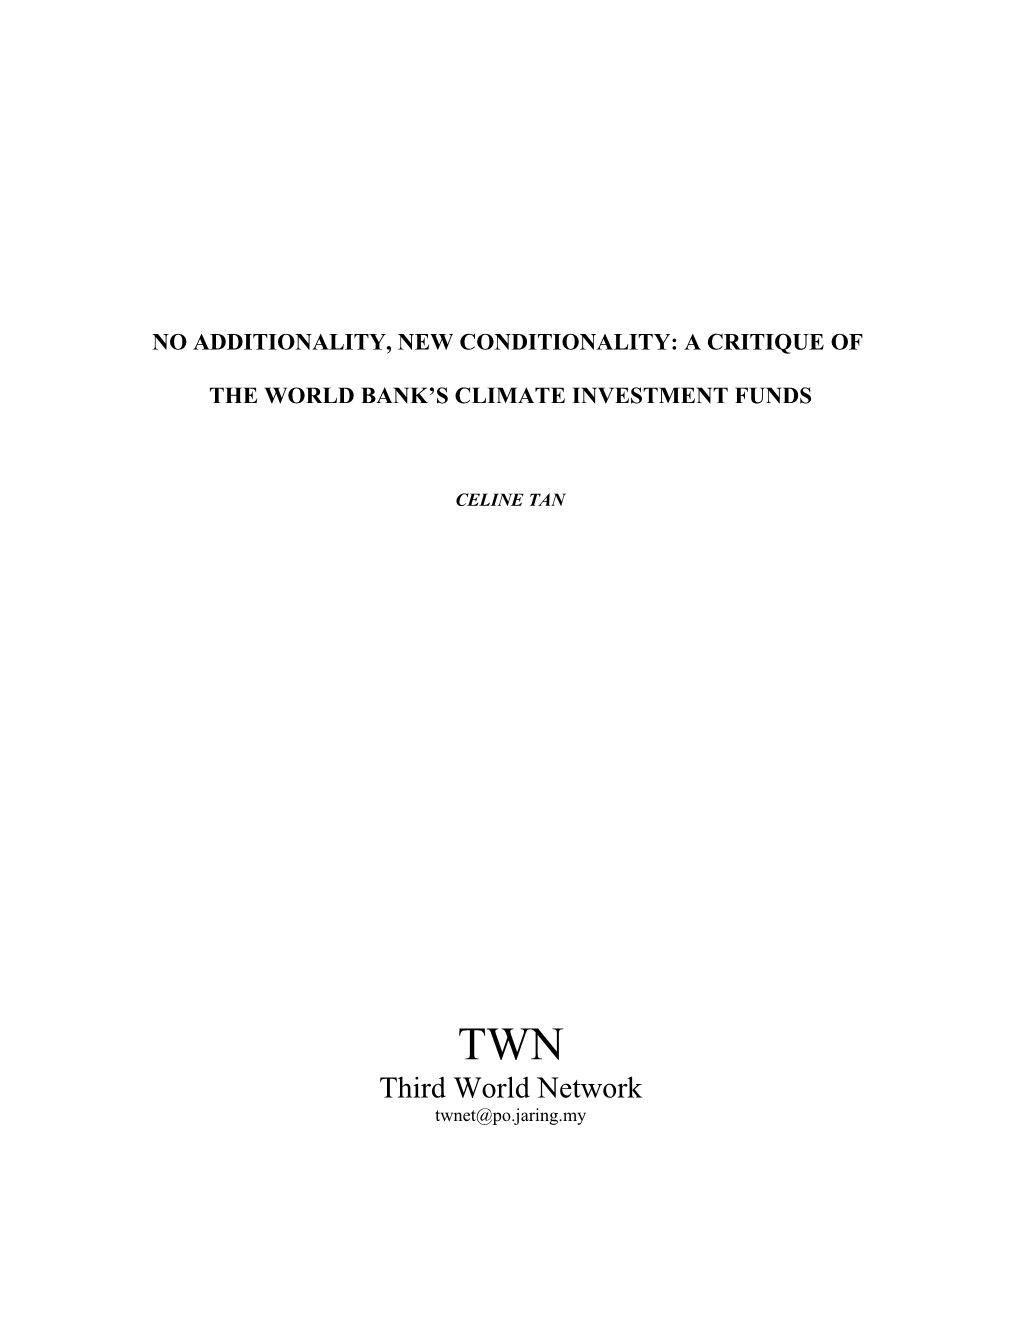 No Additionality, New Conditionality: a Critique of The